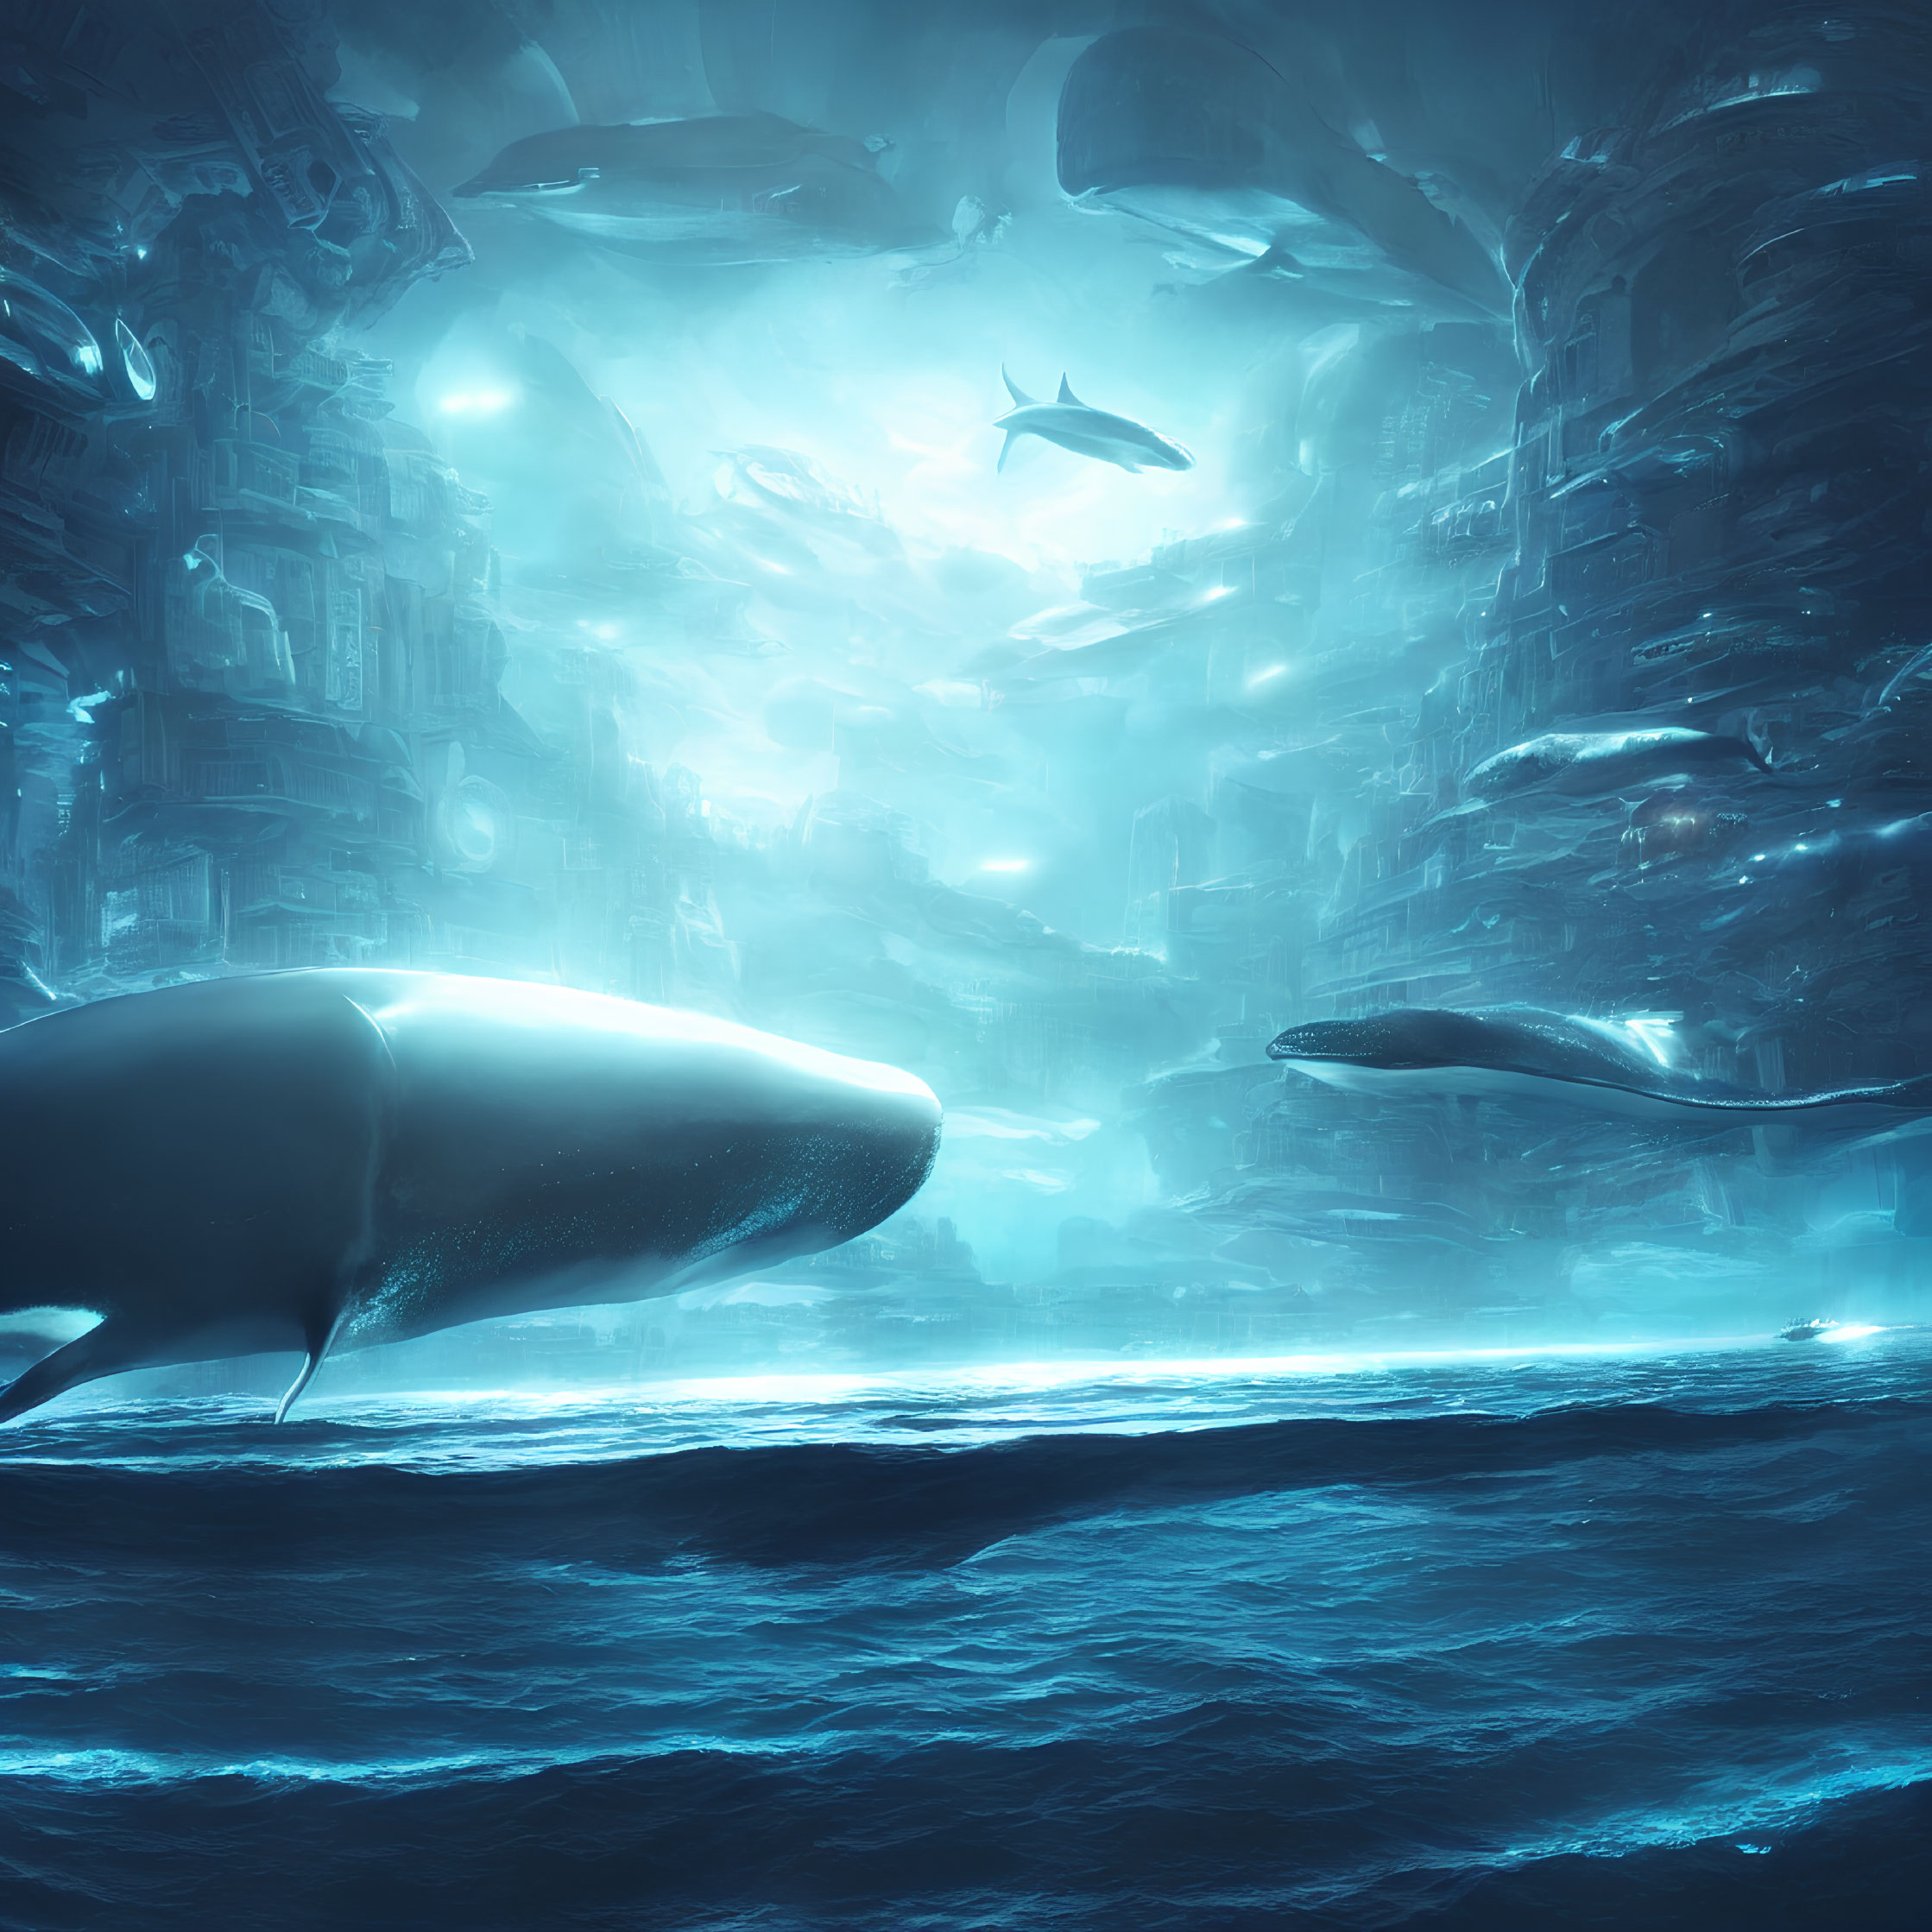 Whales swimming in sunlit ruins of a submerged city underwater